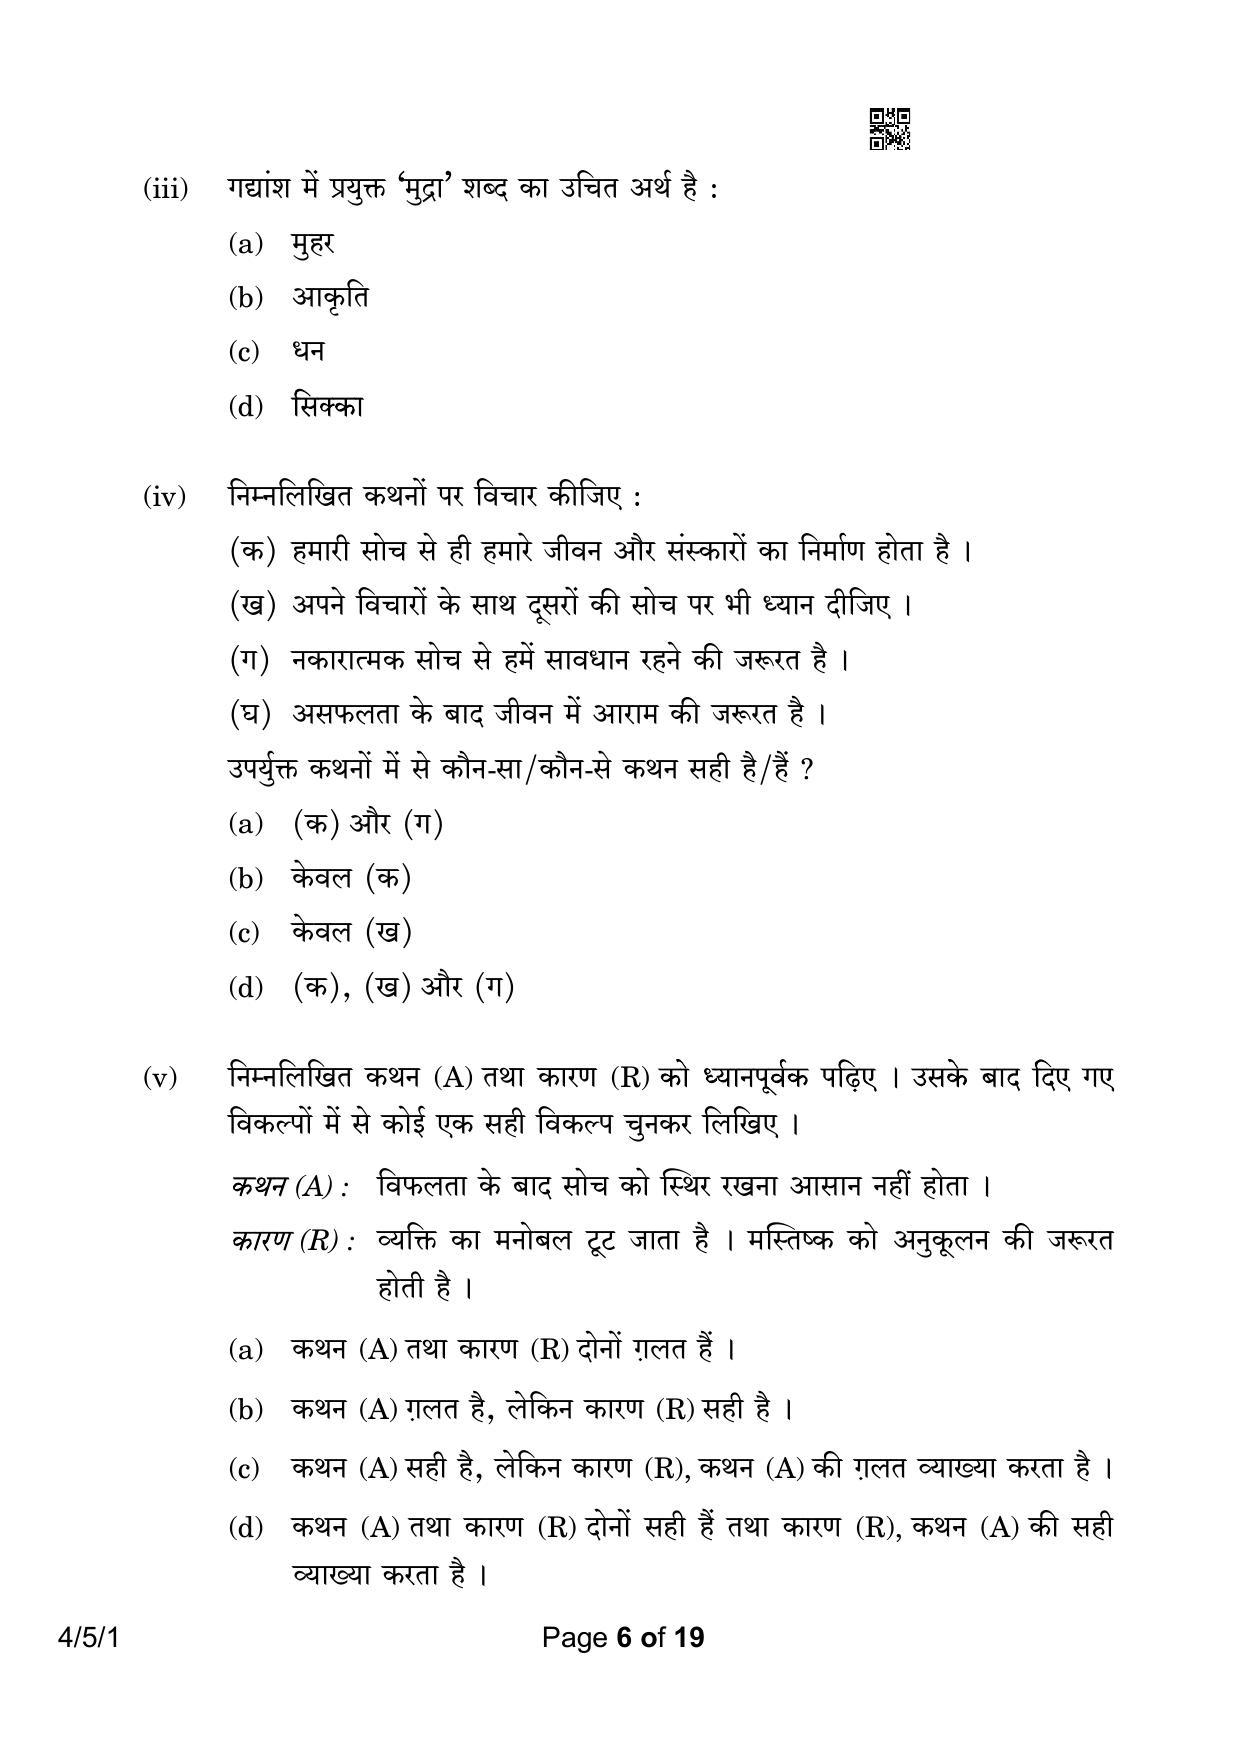 CBSE Class 10 4-5-1 Hindi B 2023 Question Paper - Page 6